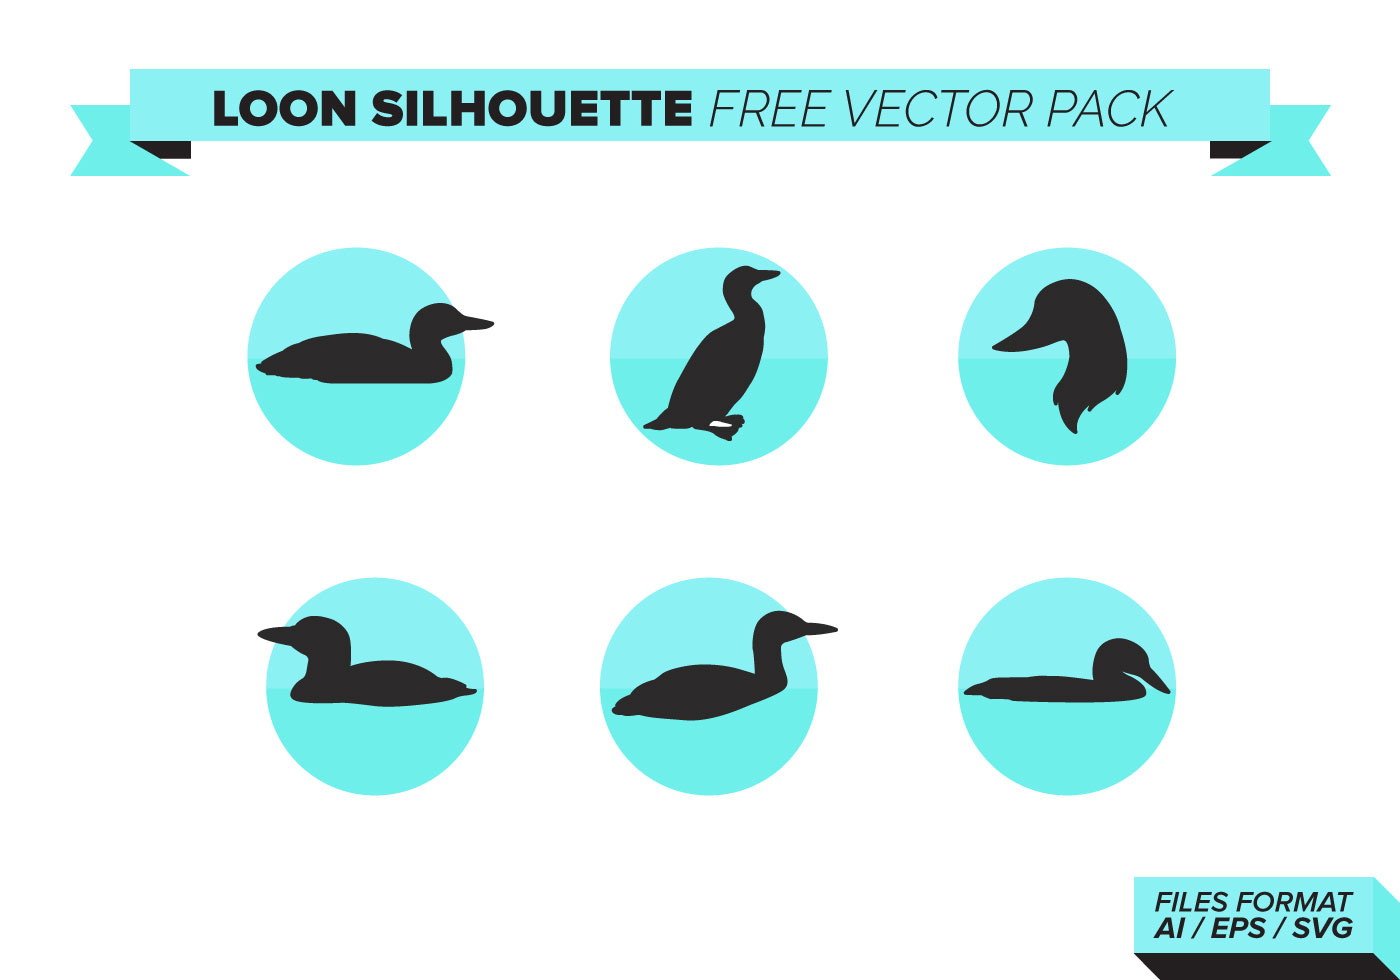 Loon Silhouette Free Vector Art.